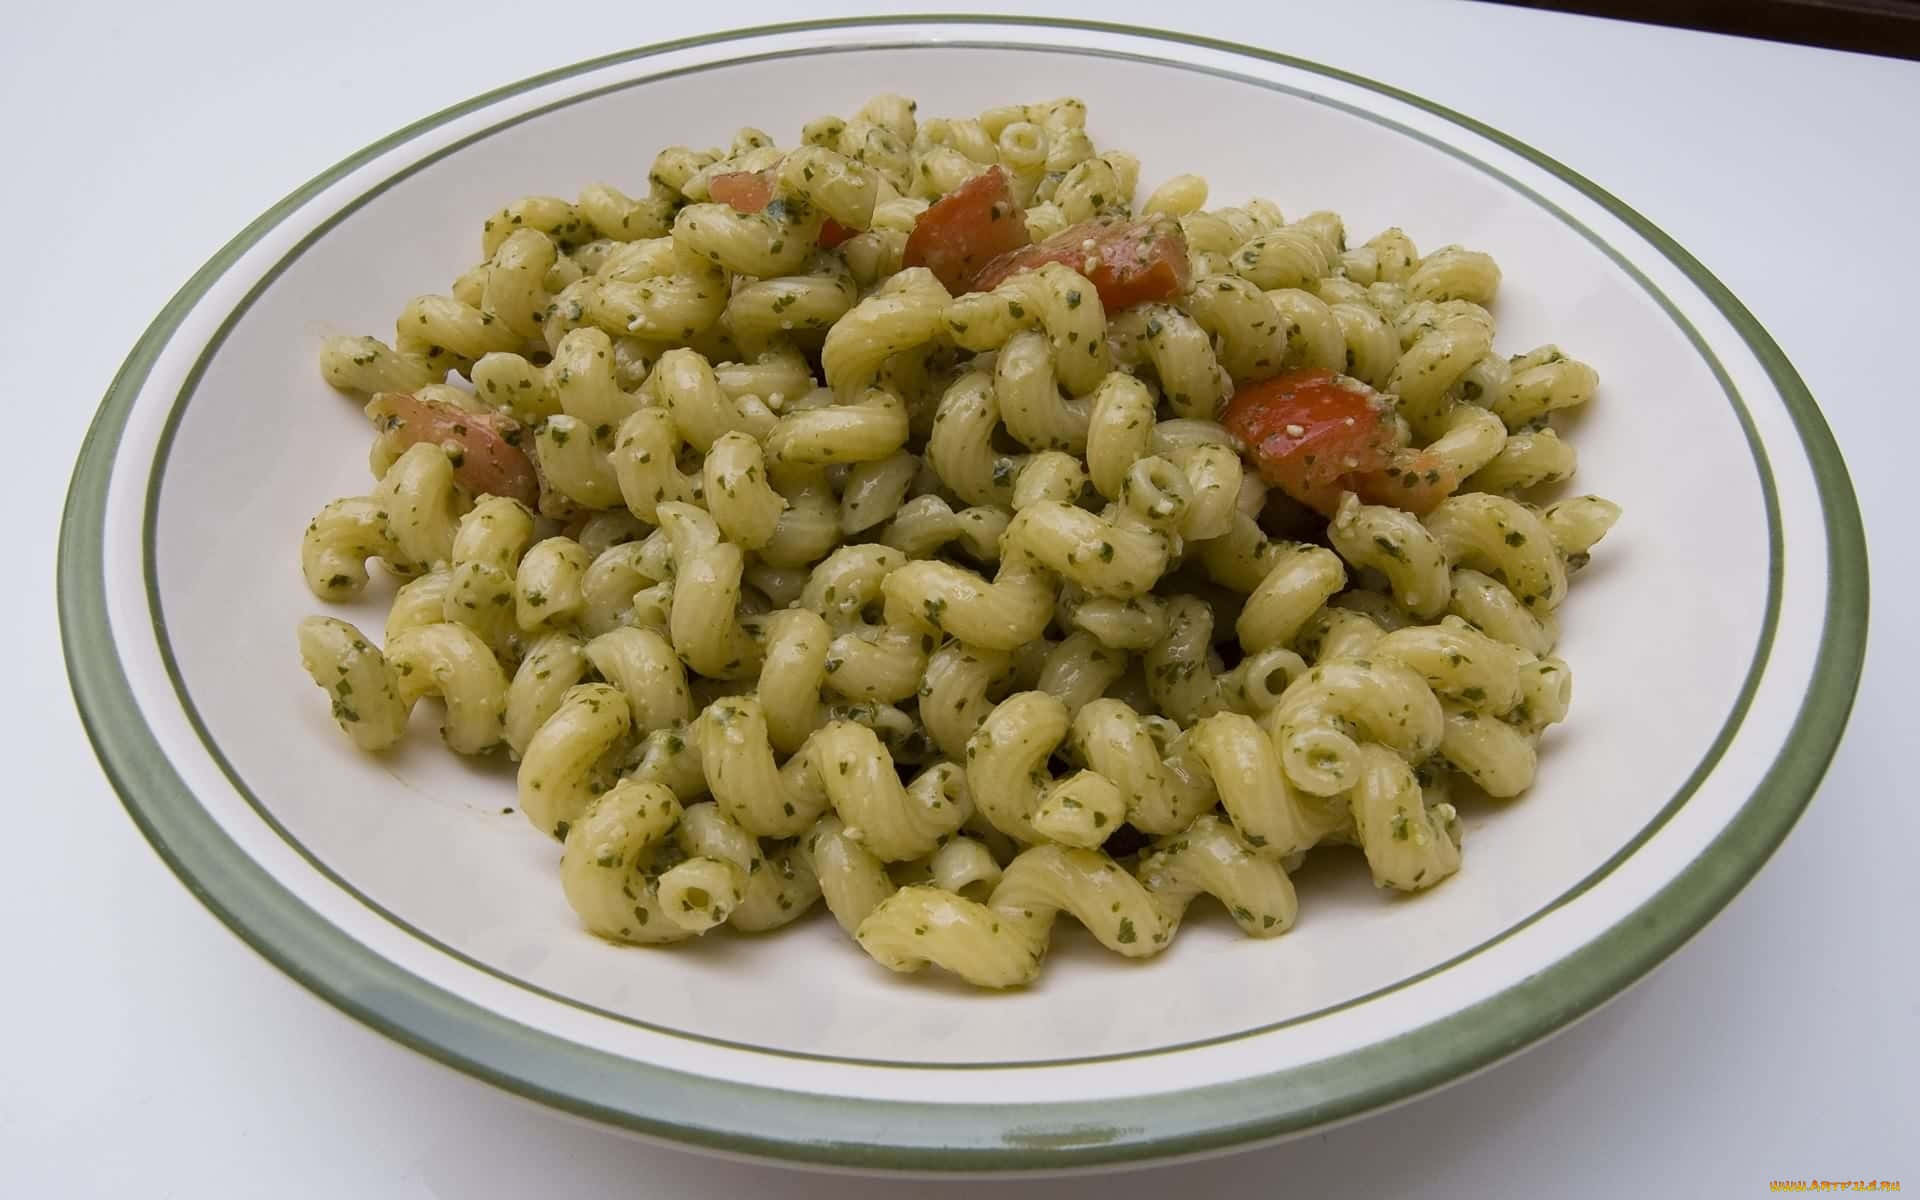 A Bowl Of Pasta With Pesto And Tomatoes